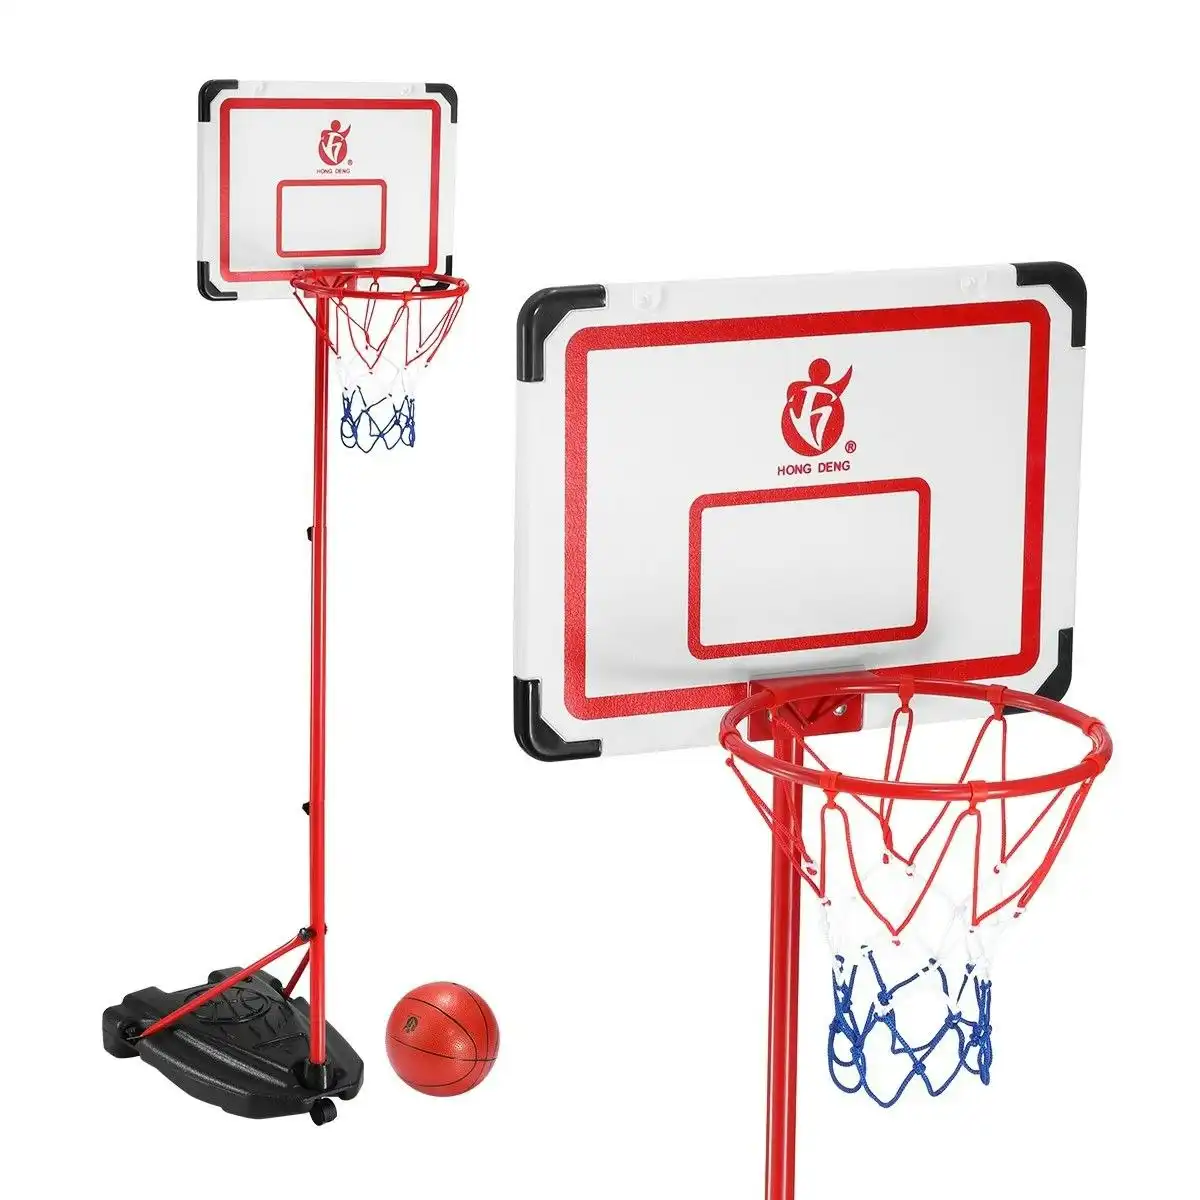 Ausway 2m Portable Adjustable Basketball Stand Hoop System for Kids w Basketball